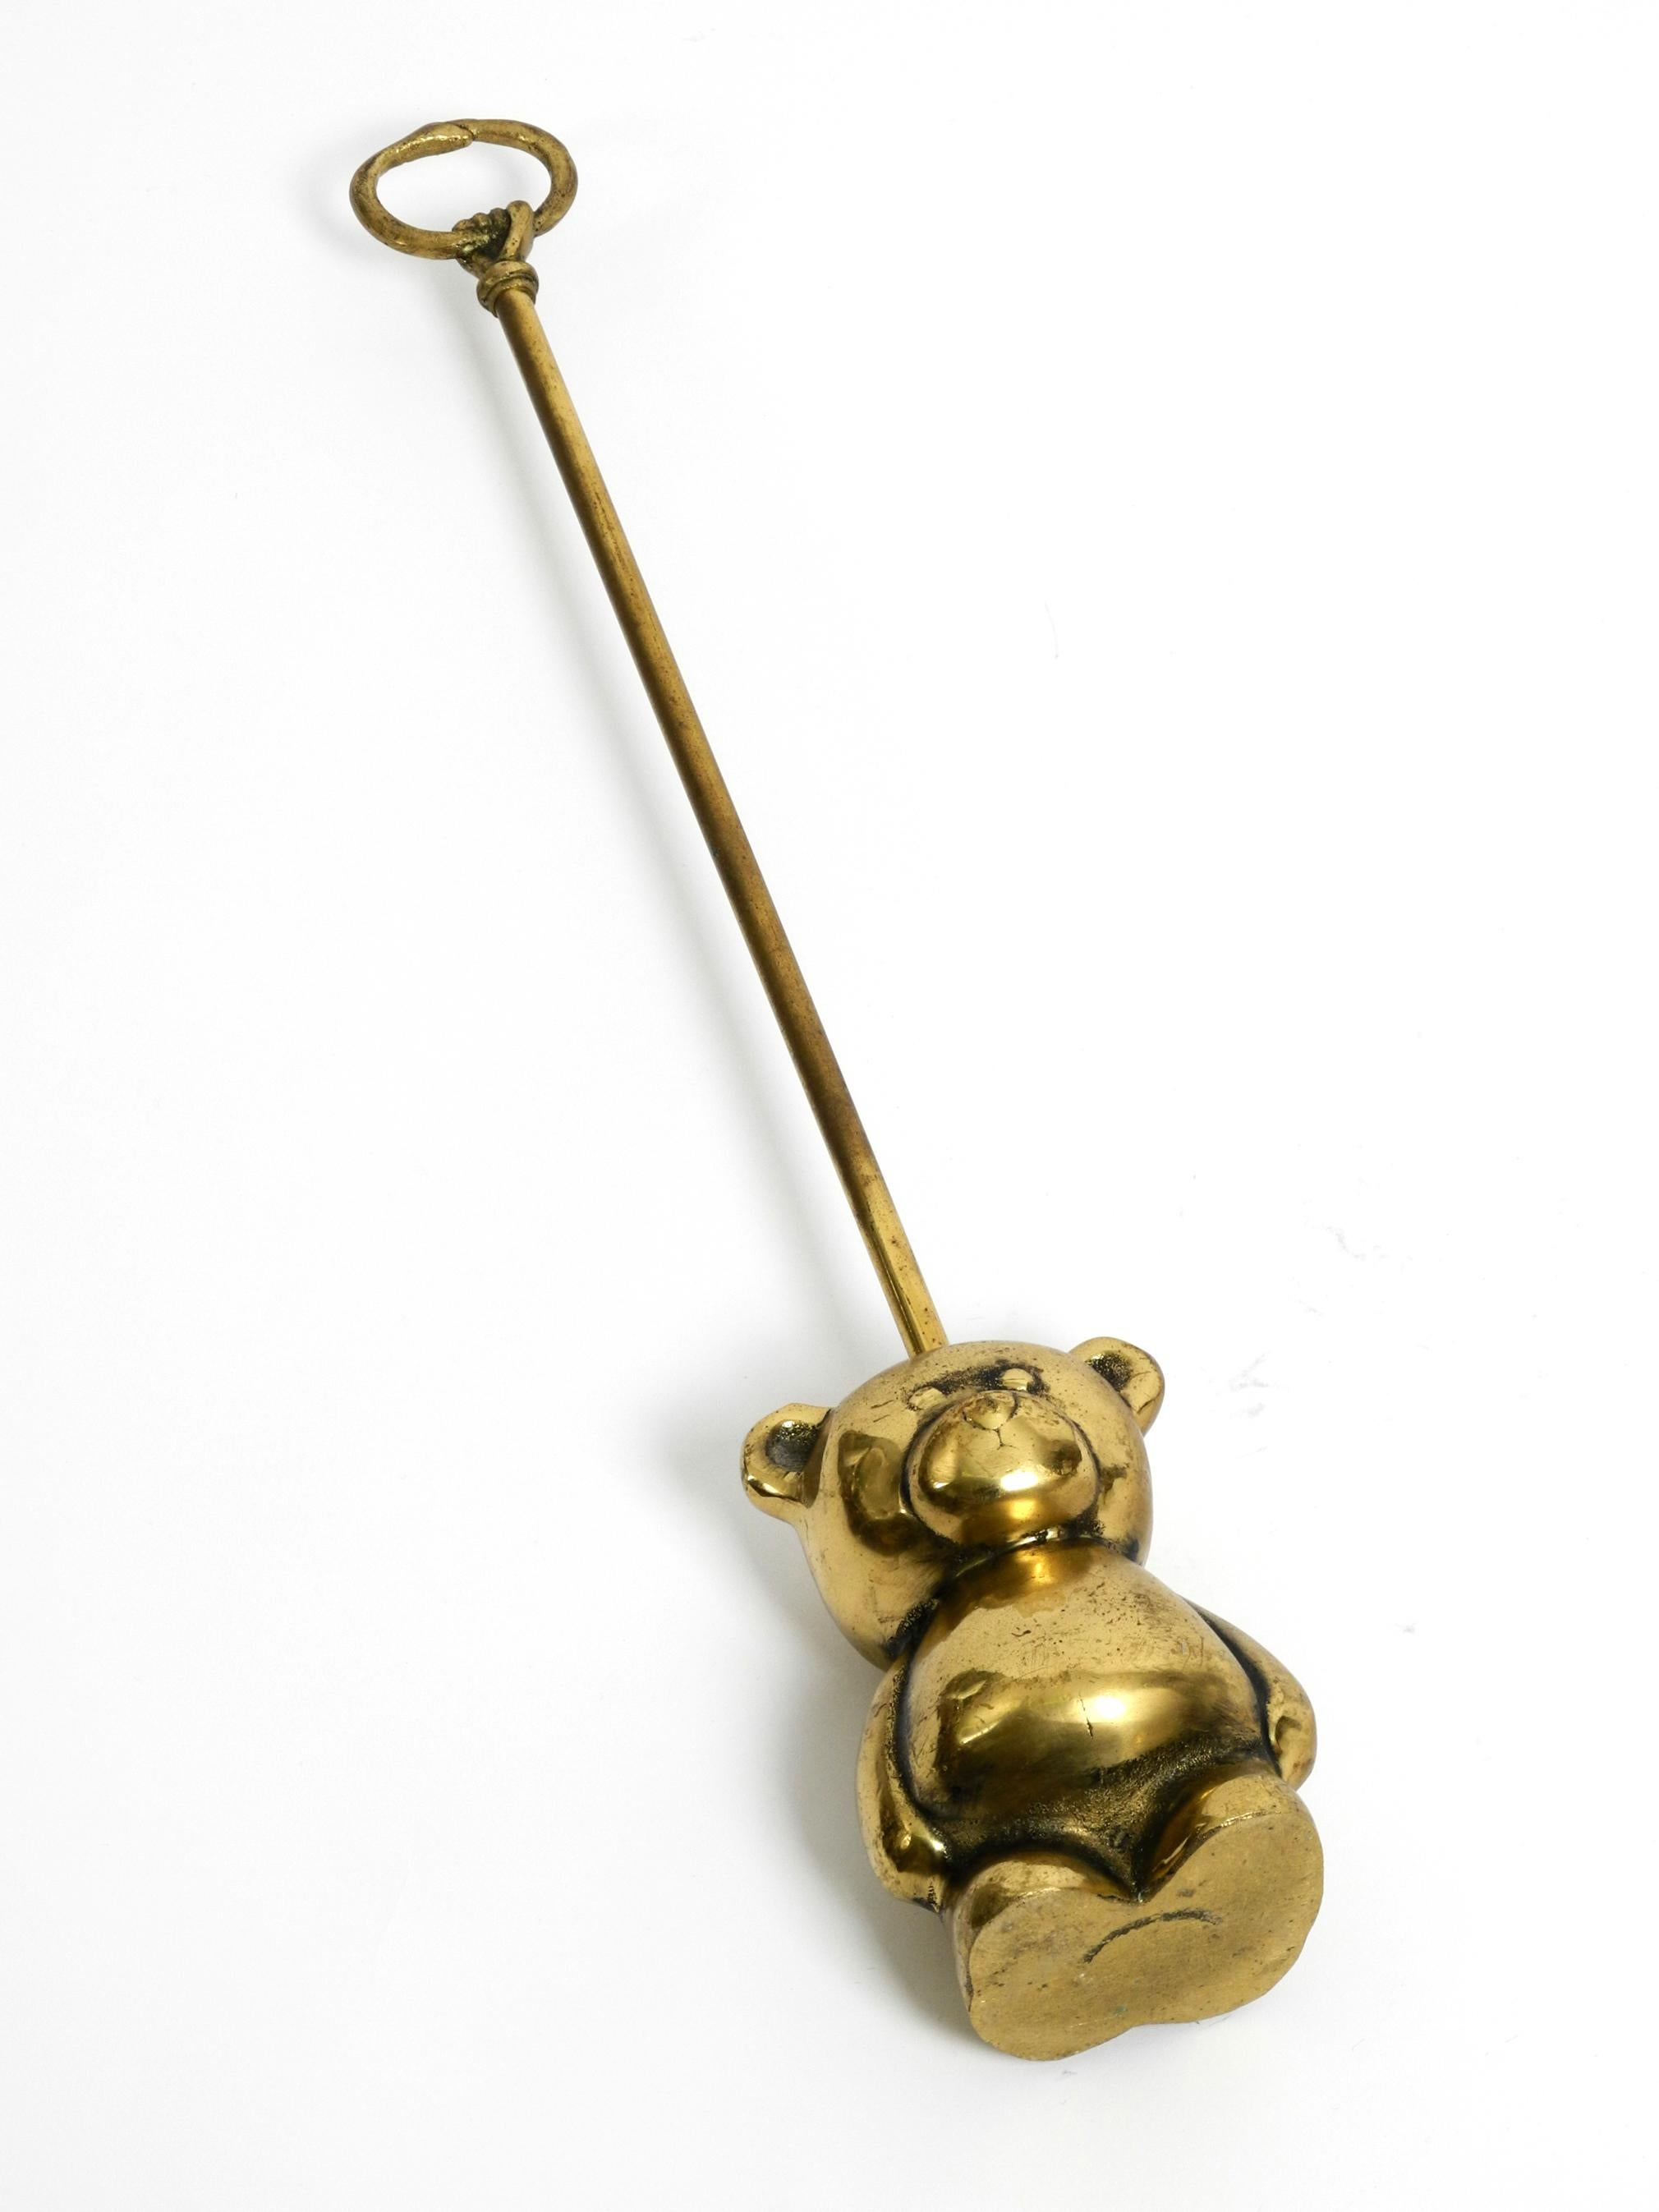 Very Heavy Solid Brass Doorstop from the 1960s in the Shape of a Cute Teddy Bear 1